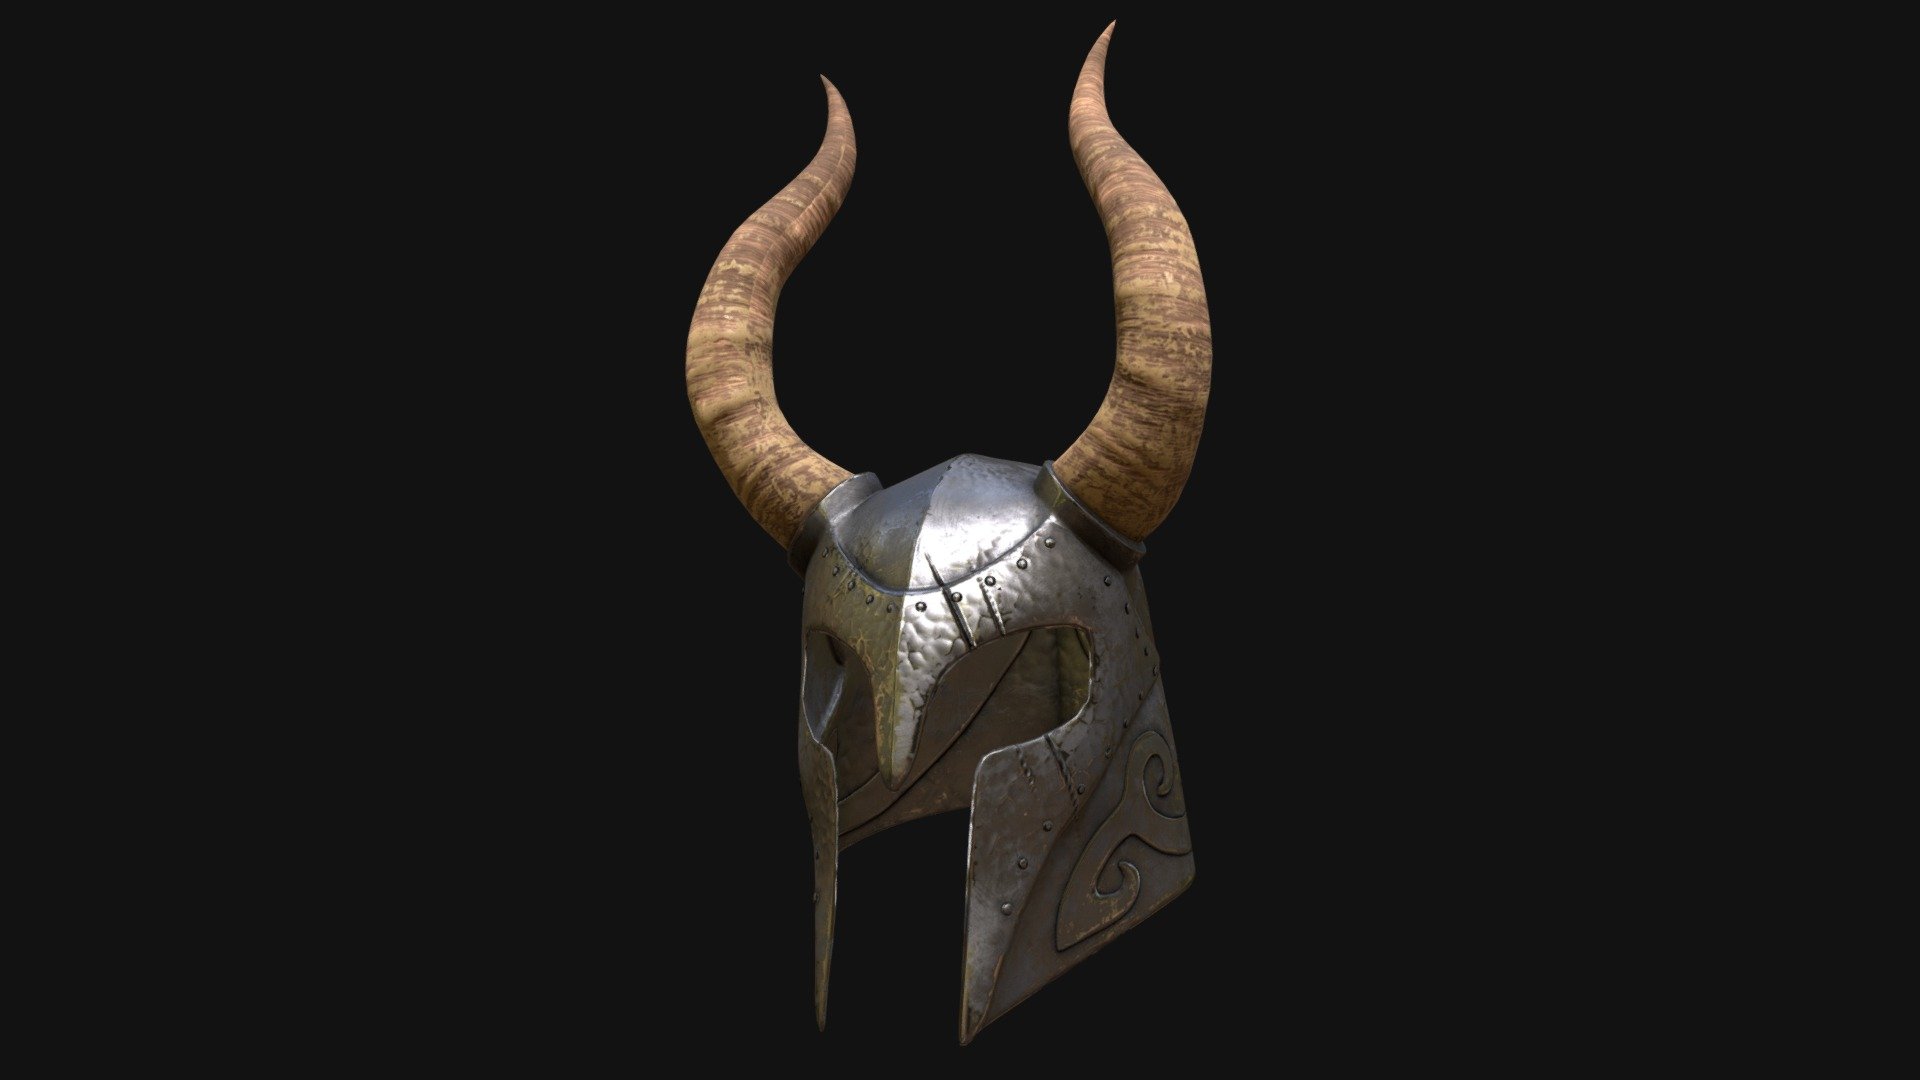 Helment of Yngol from Skyrim, modeled in blender and textured in Substance Painter 3d model